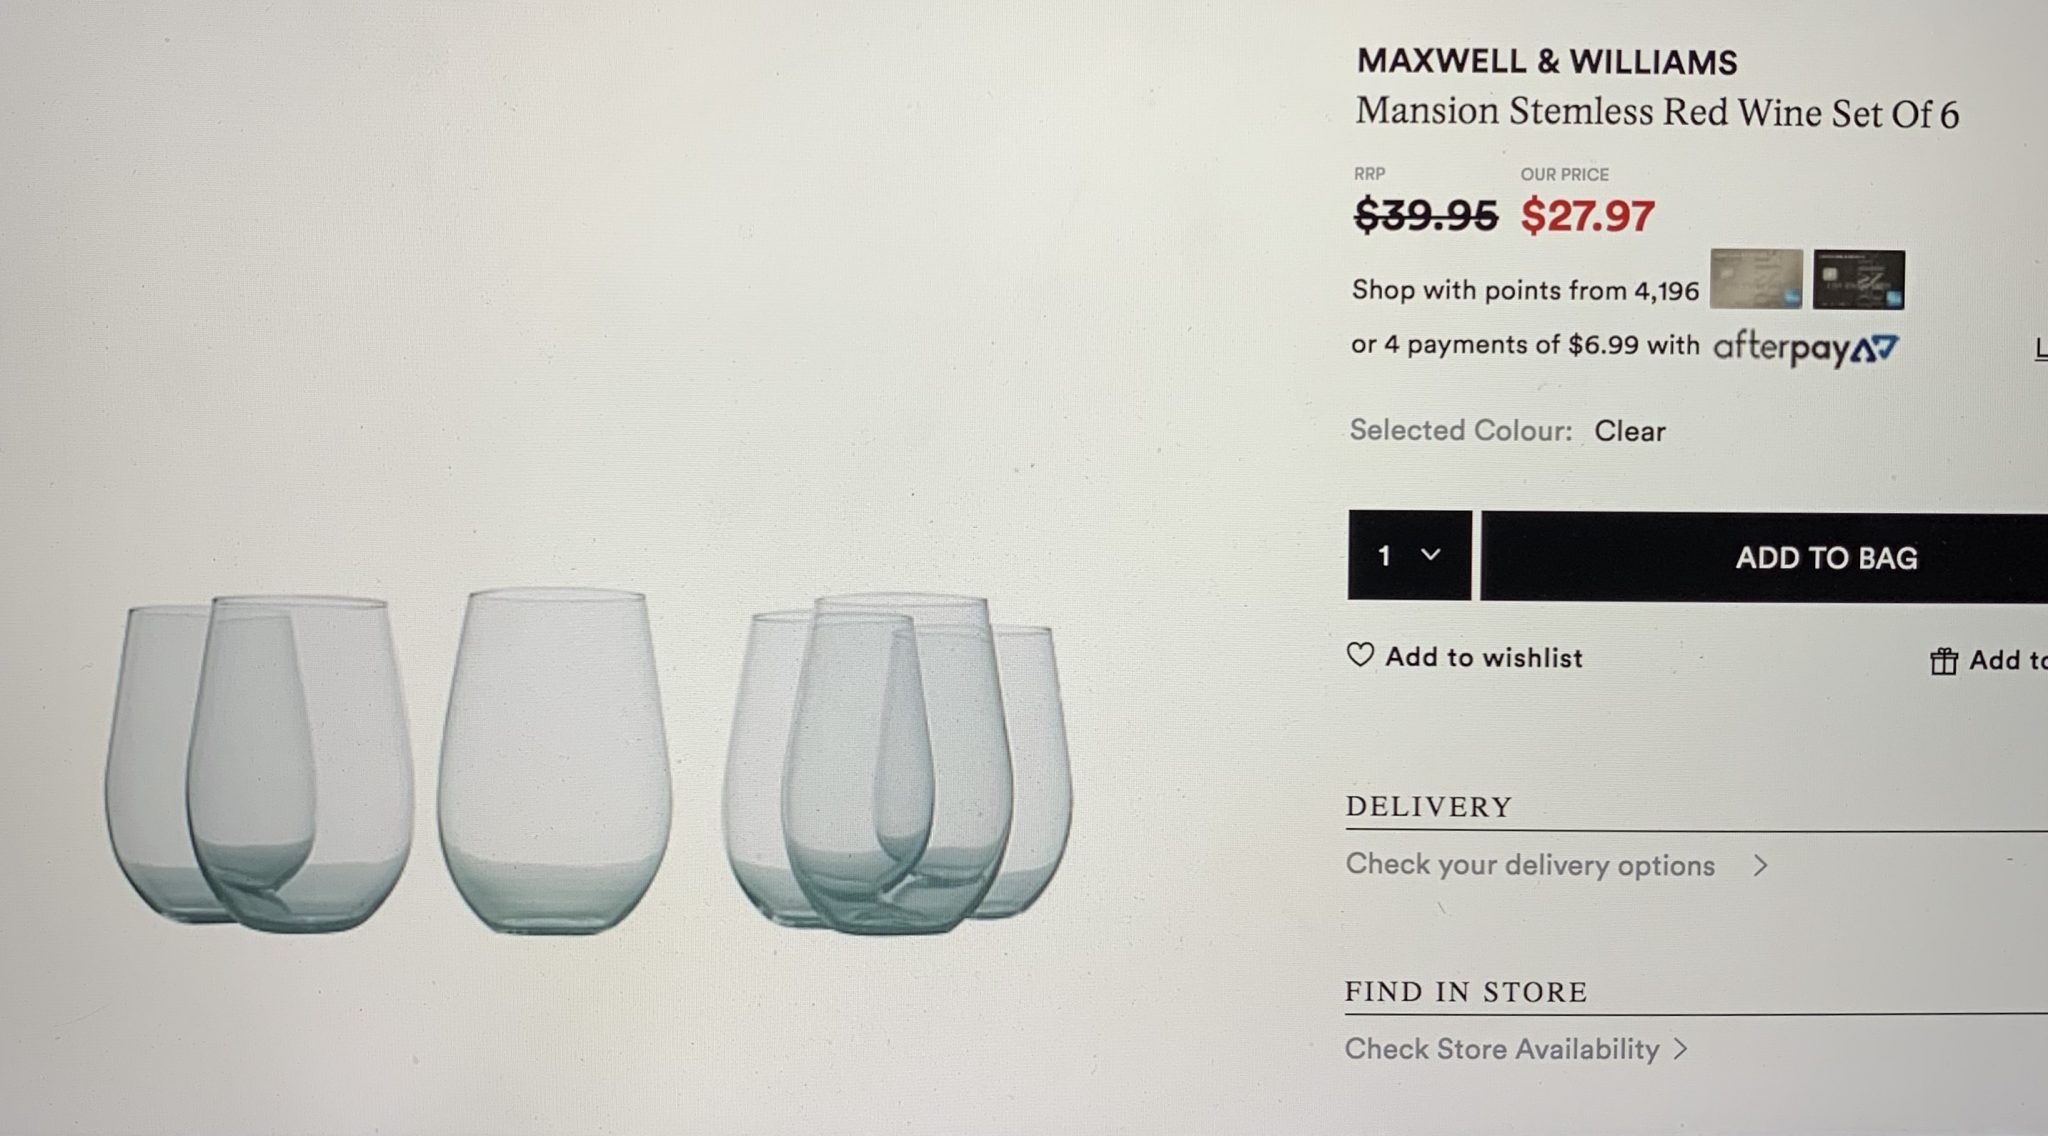 Maxwell & Williams Mansion Stemless Red Wine Set of 6